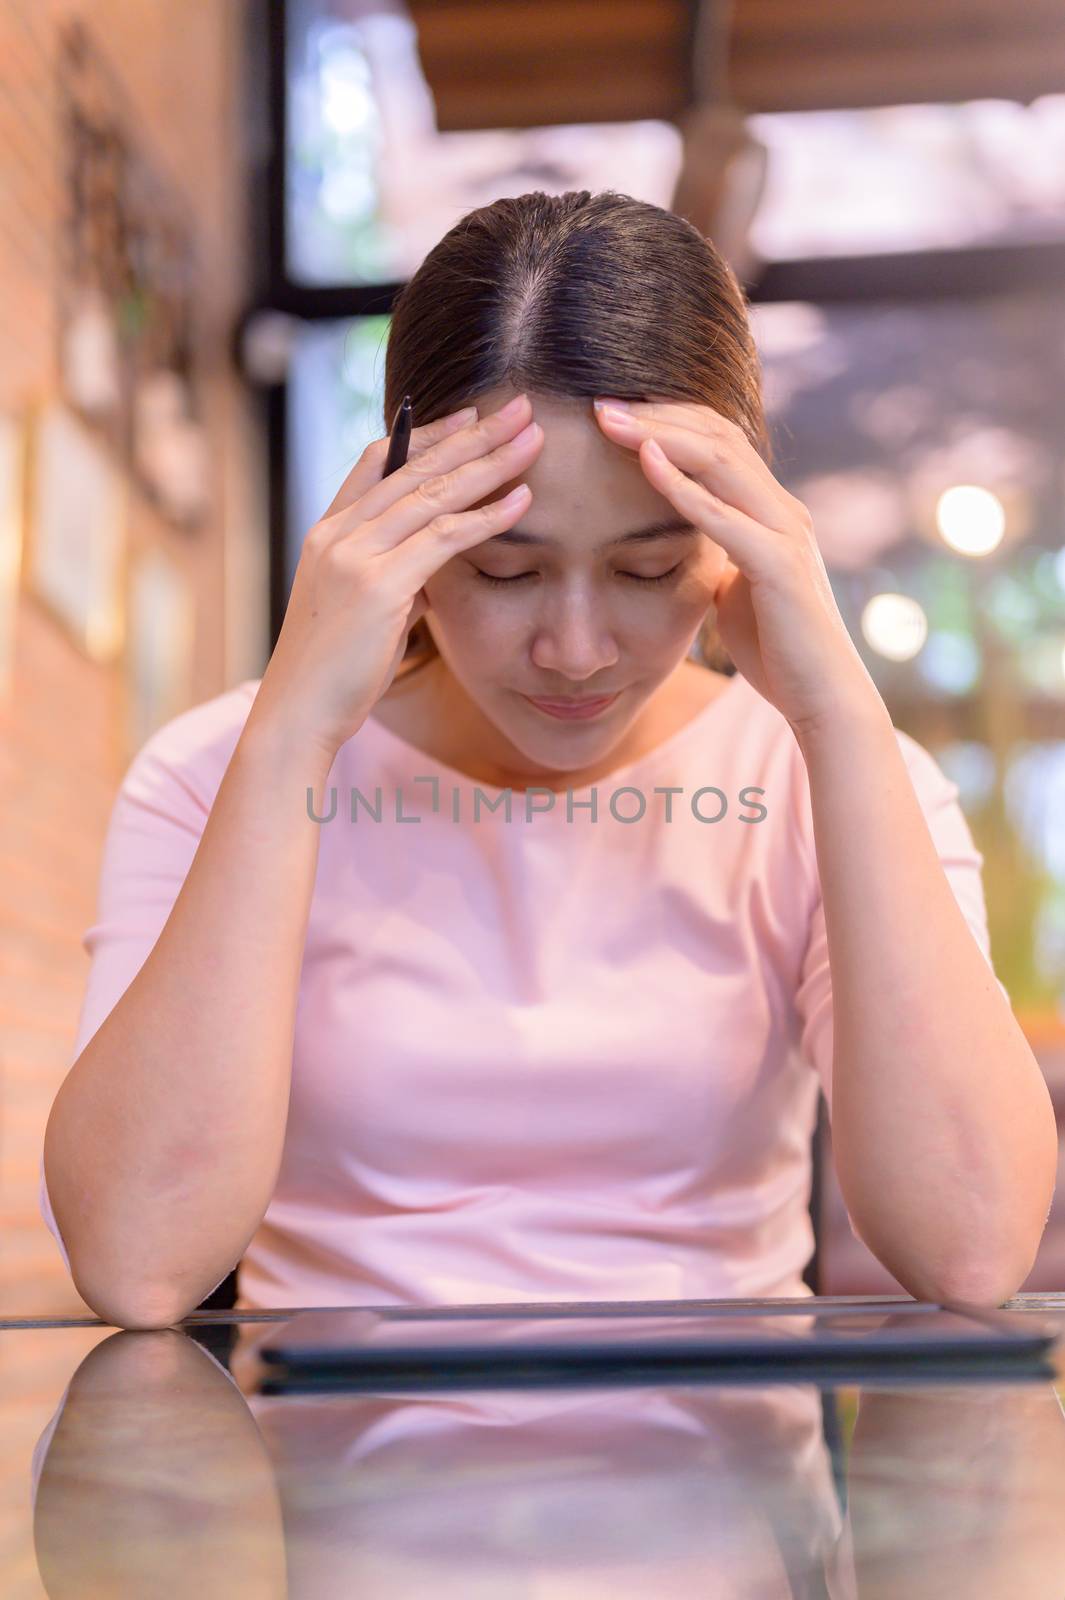 Unemployment and Mental health problem. Corona virus job losses in Asia. Thai businesswoman looking for new job on website. Post-traumatic stress disorder (PTSD). by graphixchon